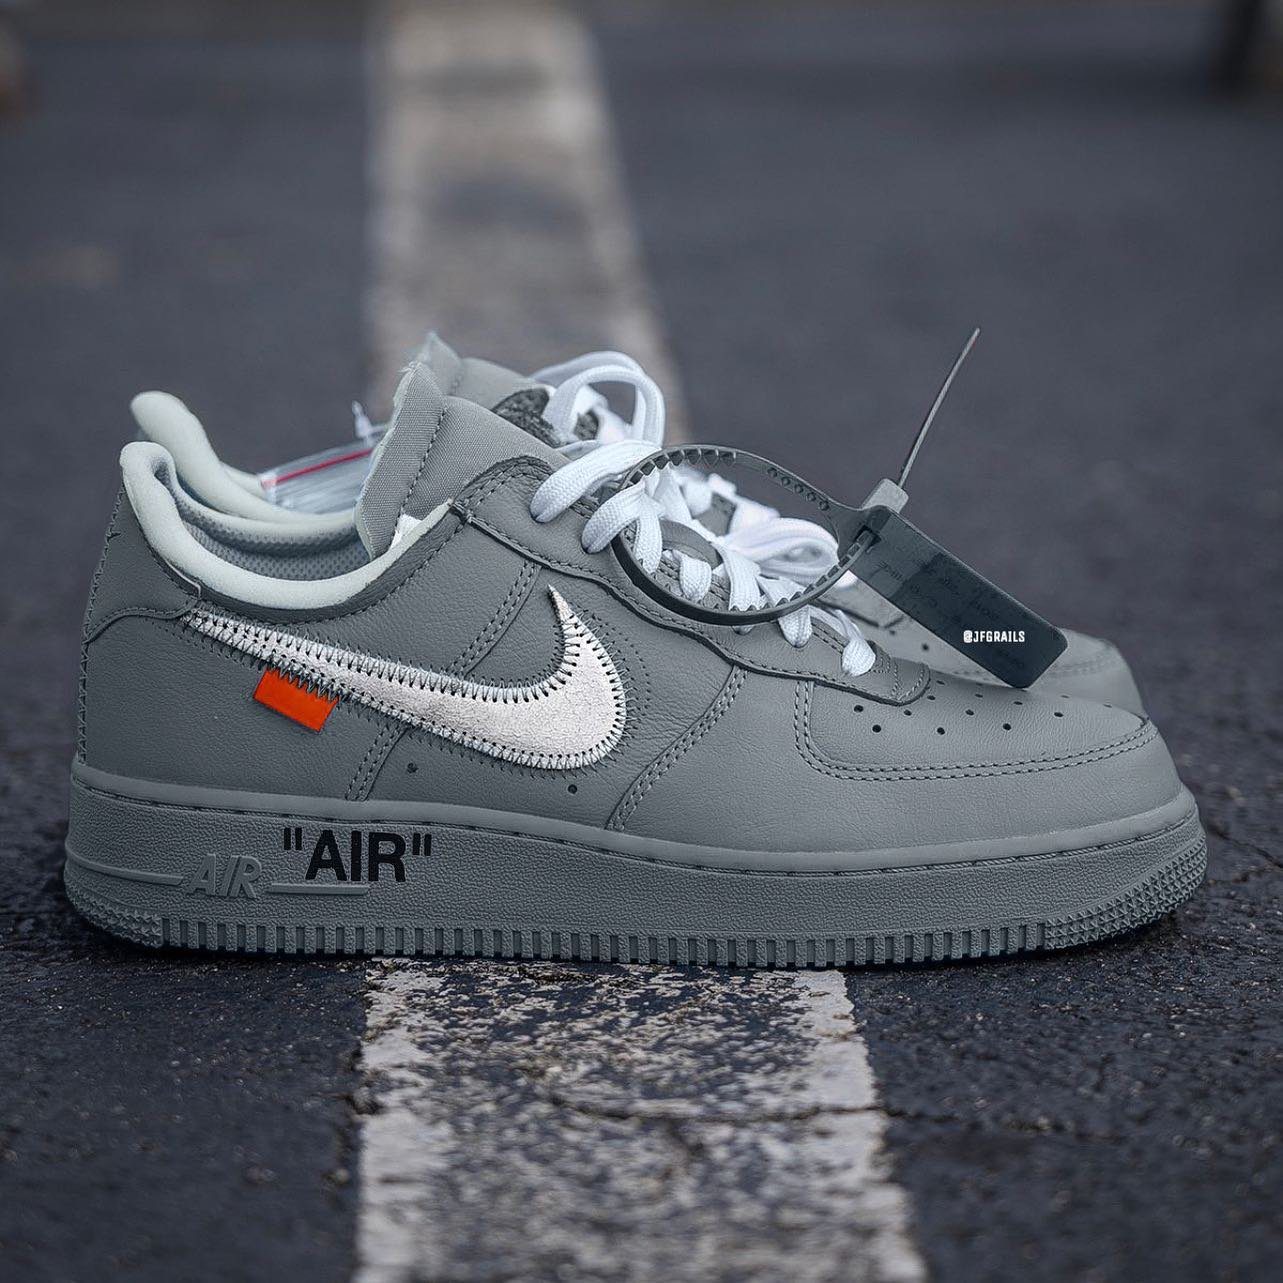 New Off-White x Air Force 1 Reportedly Releasing Soon